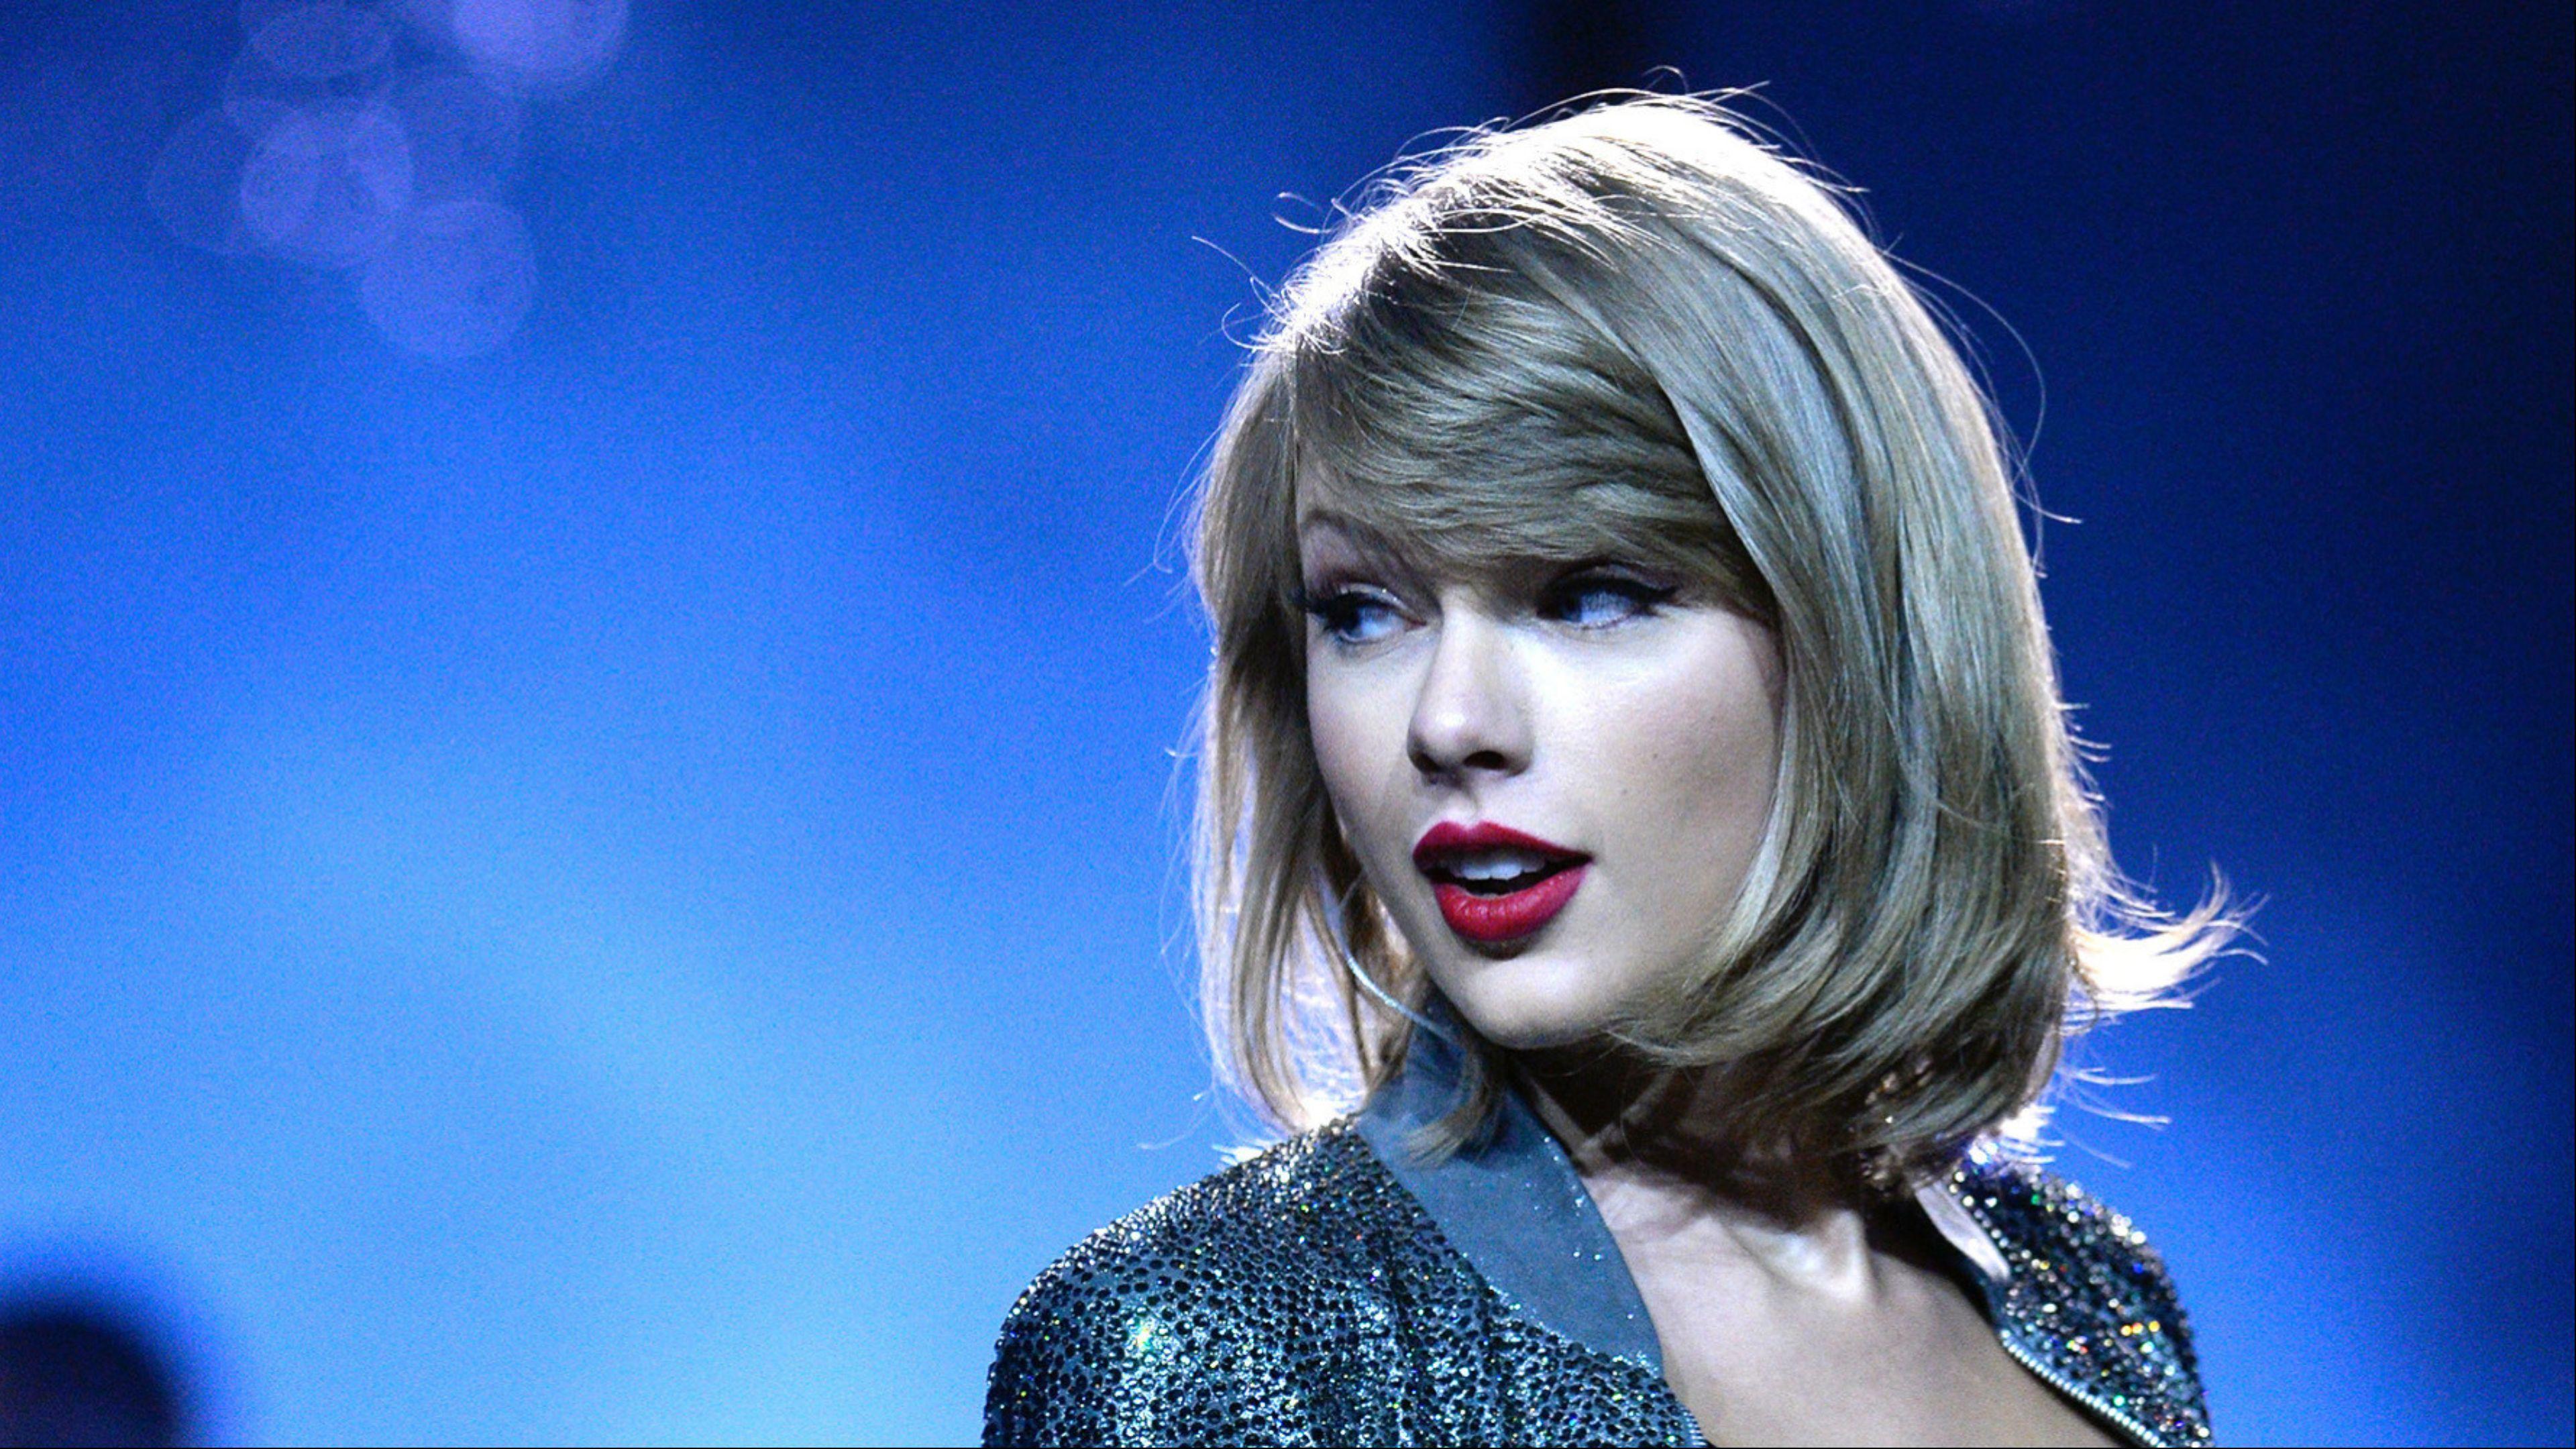 Taylor Swift Wallpaper Collection For Free Download